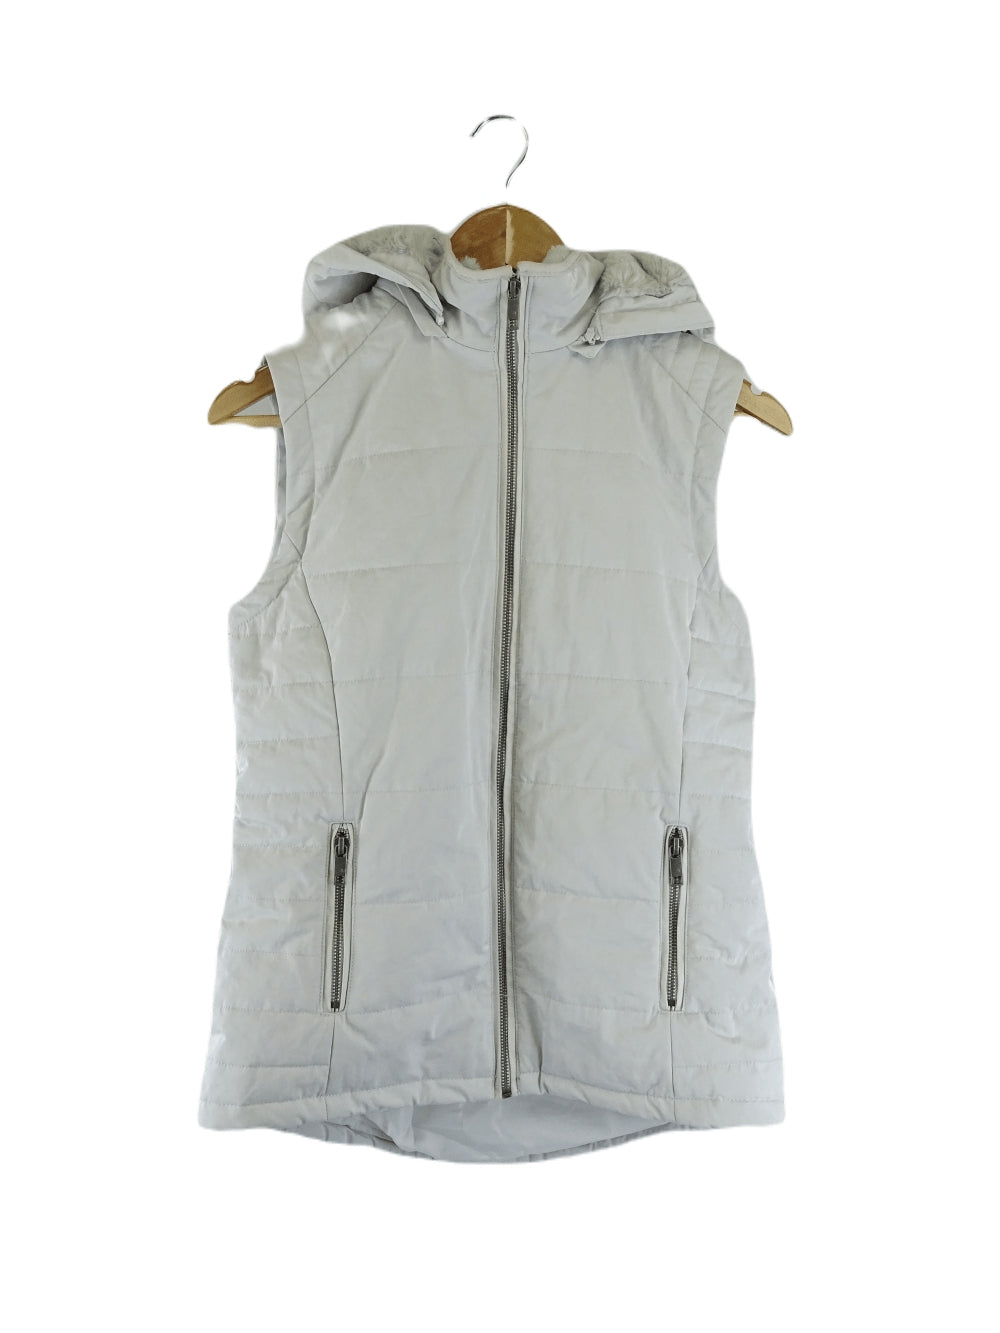 Jeanswest Grey Vest with Fluffy Hood 8